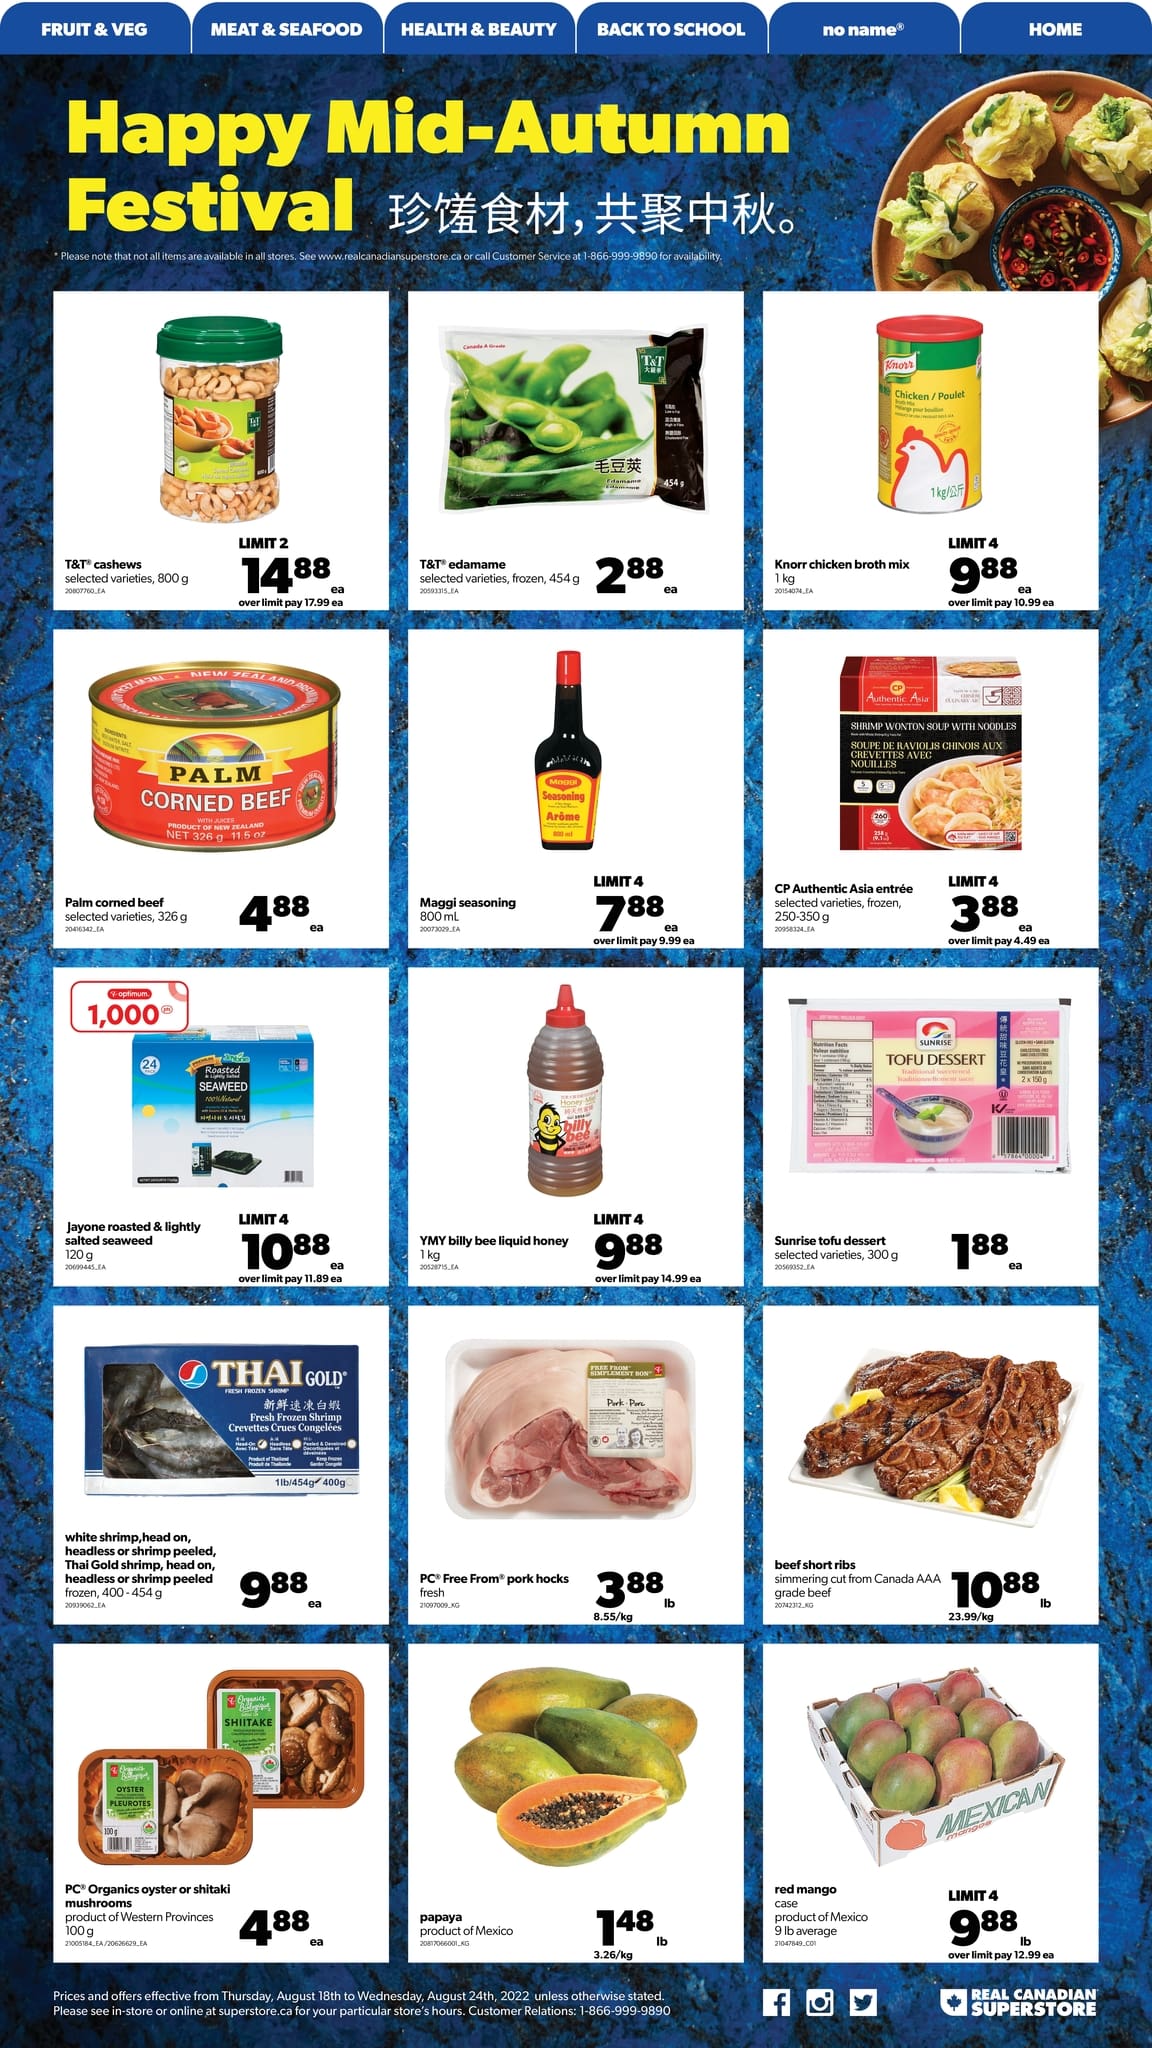 Real Canadian Superstore Western Canada - Weekly Flyer Specials - Page 20